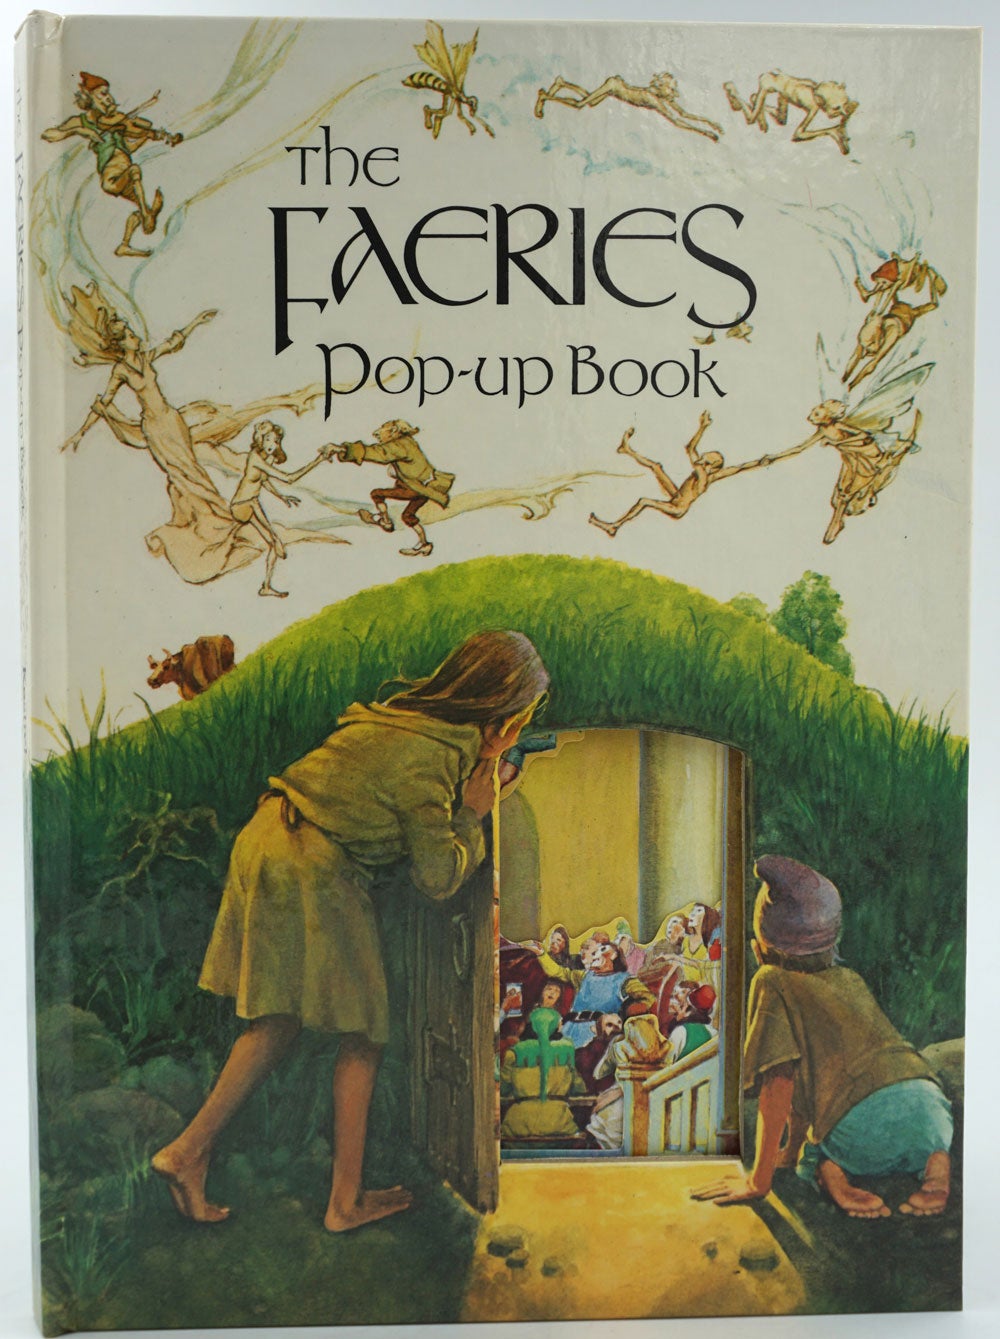 The Faeries Pop-up Book | First edition